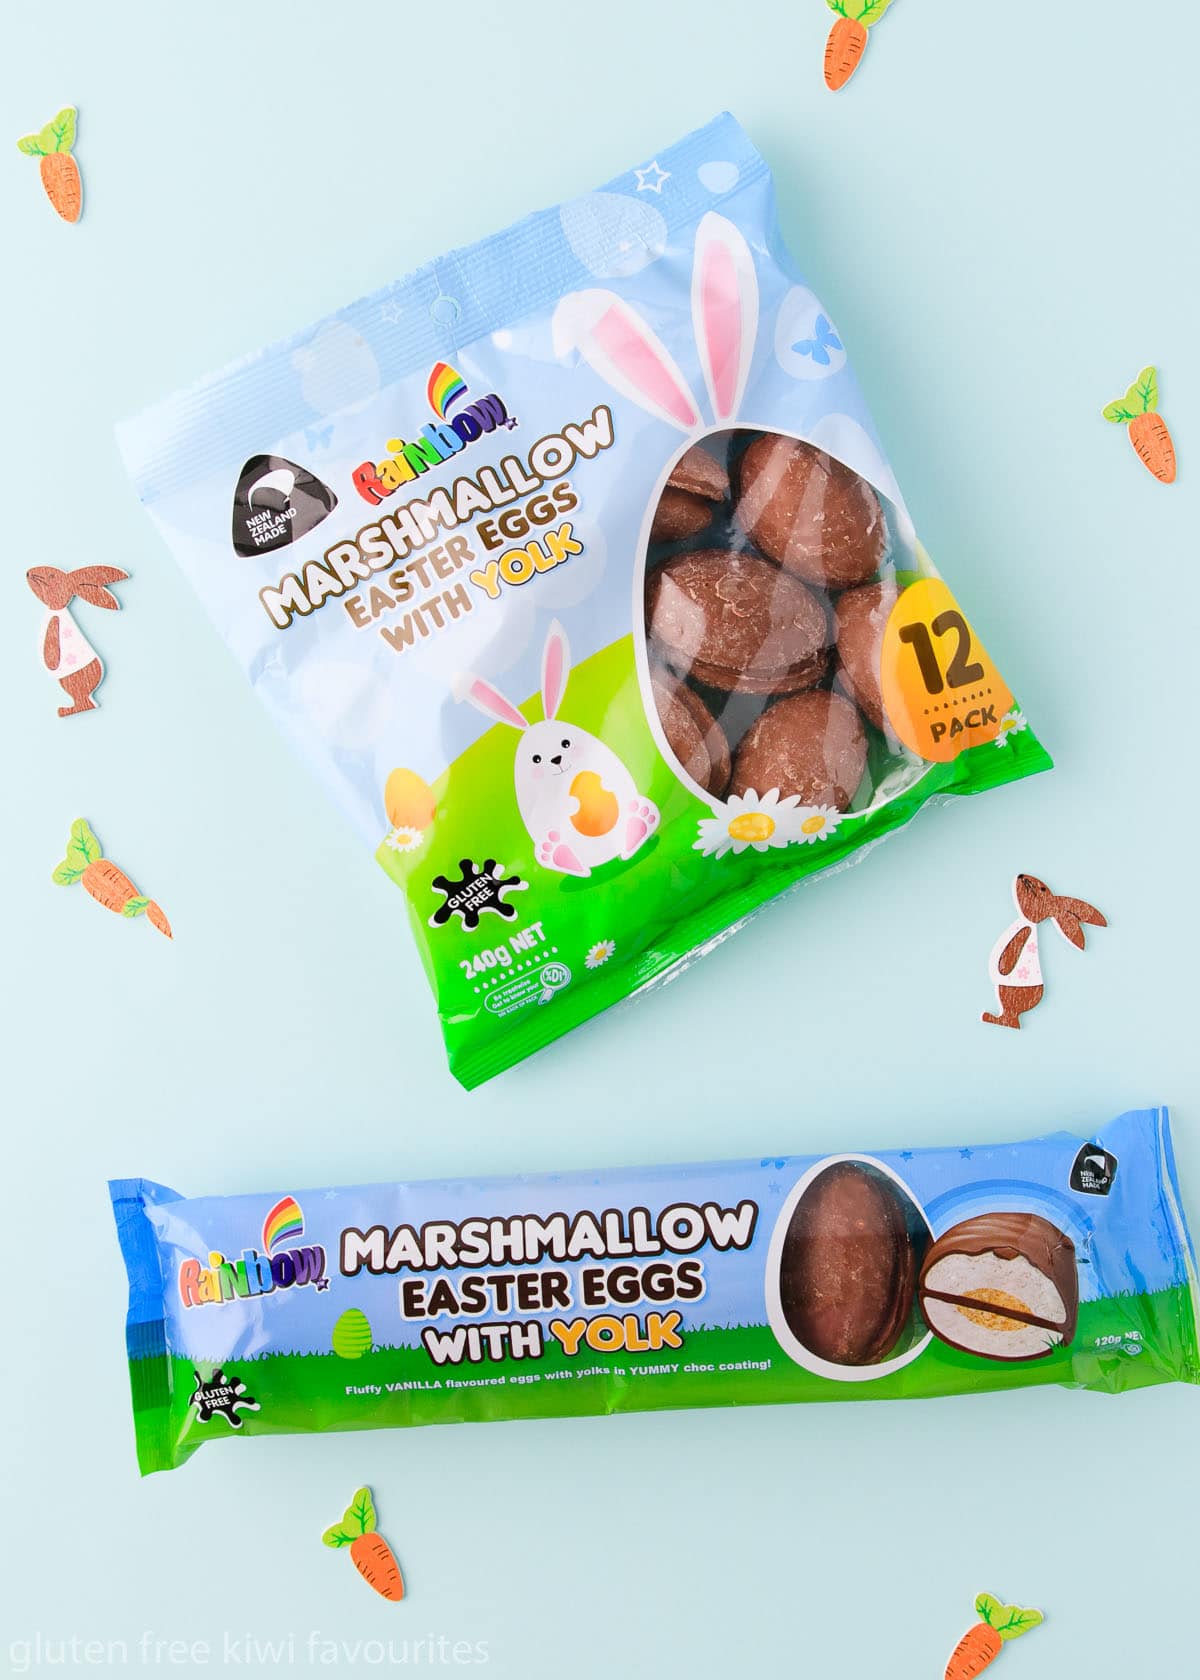 Rainbow gluten free easter eggs, on a mint green background with little wooden bunnies and carrots.